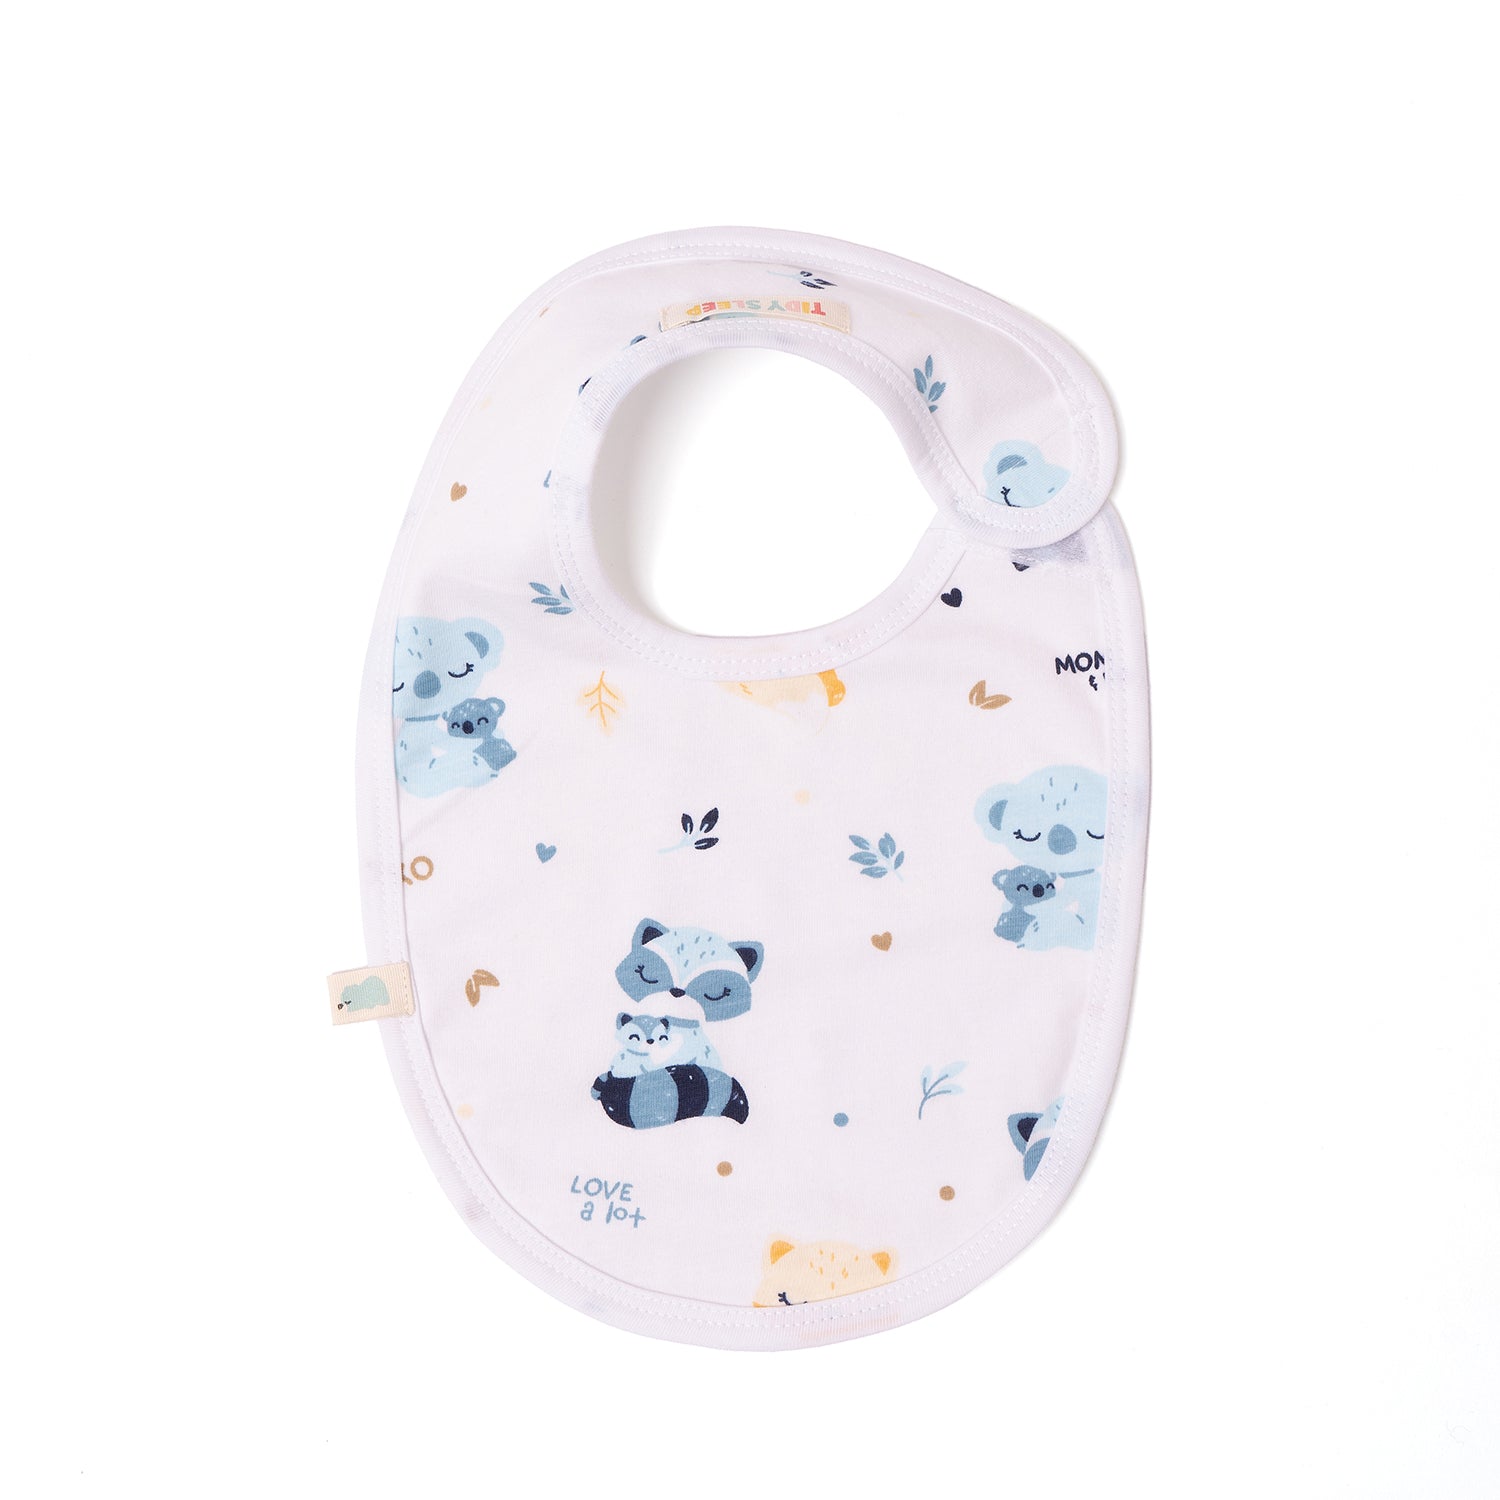 Cotton Jersey BIB for Baby - Mom&Me